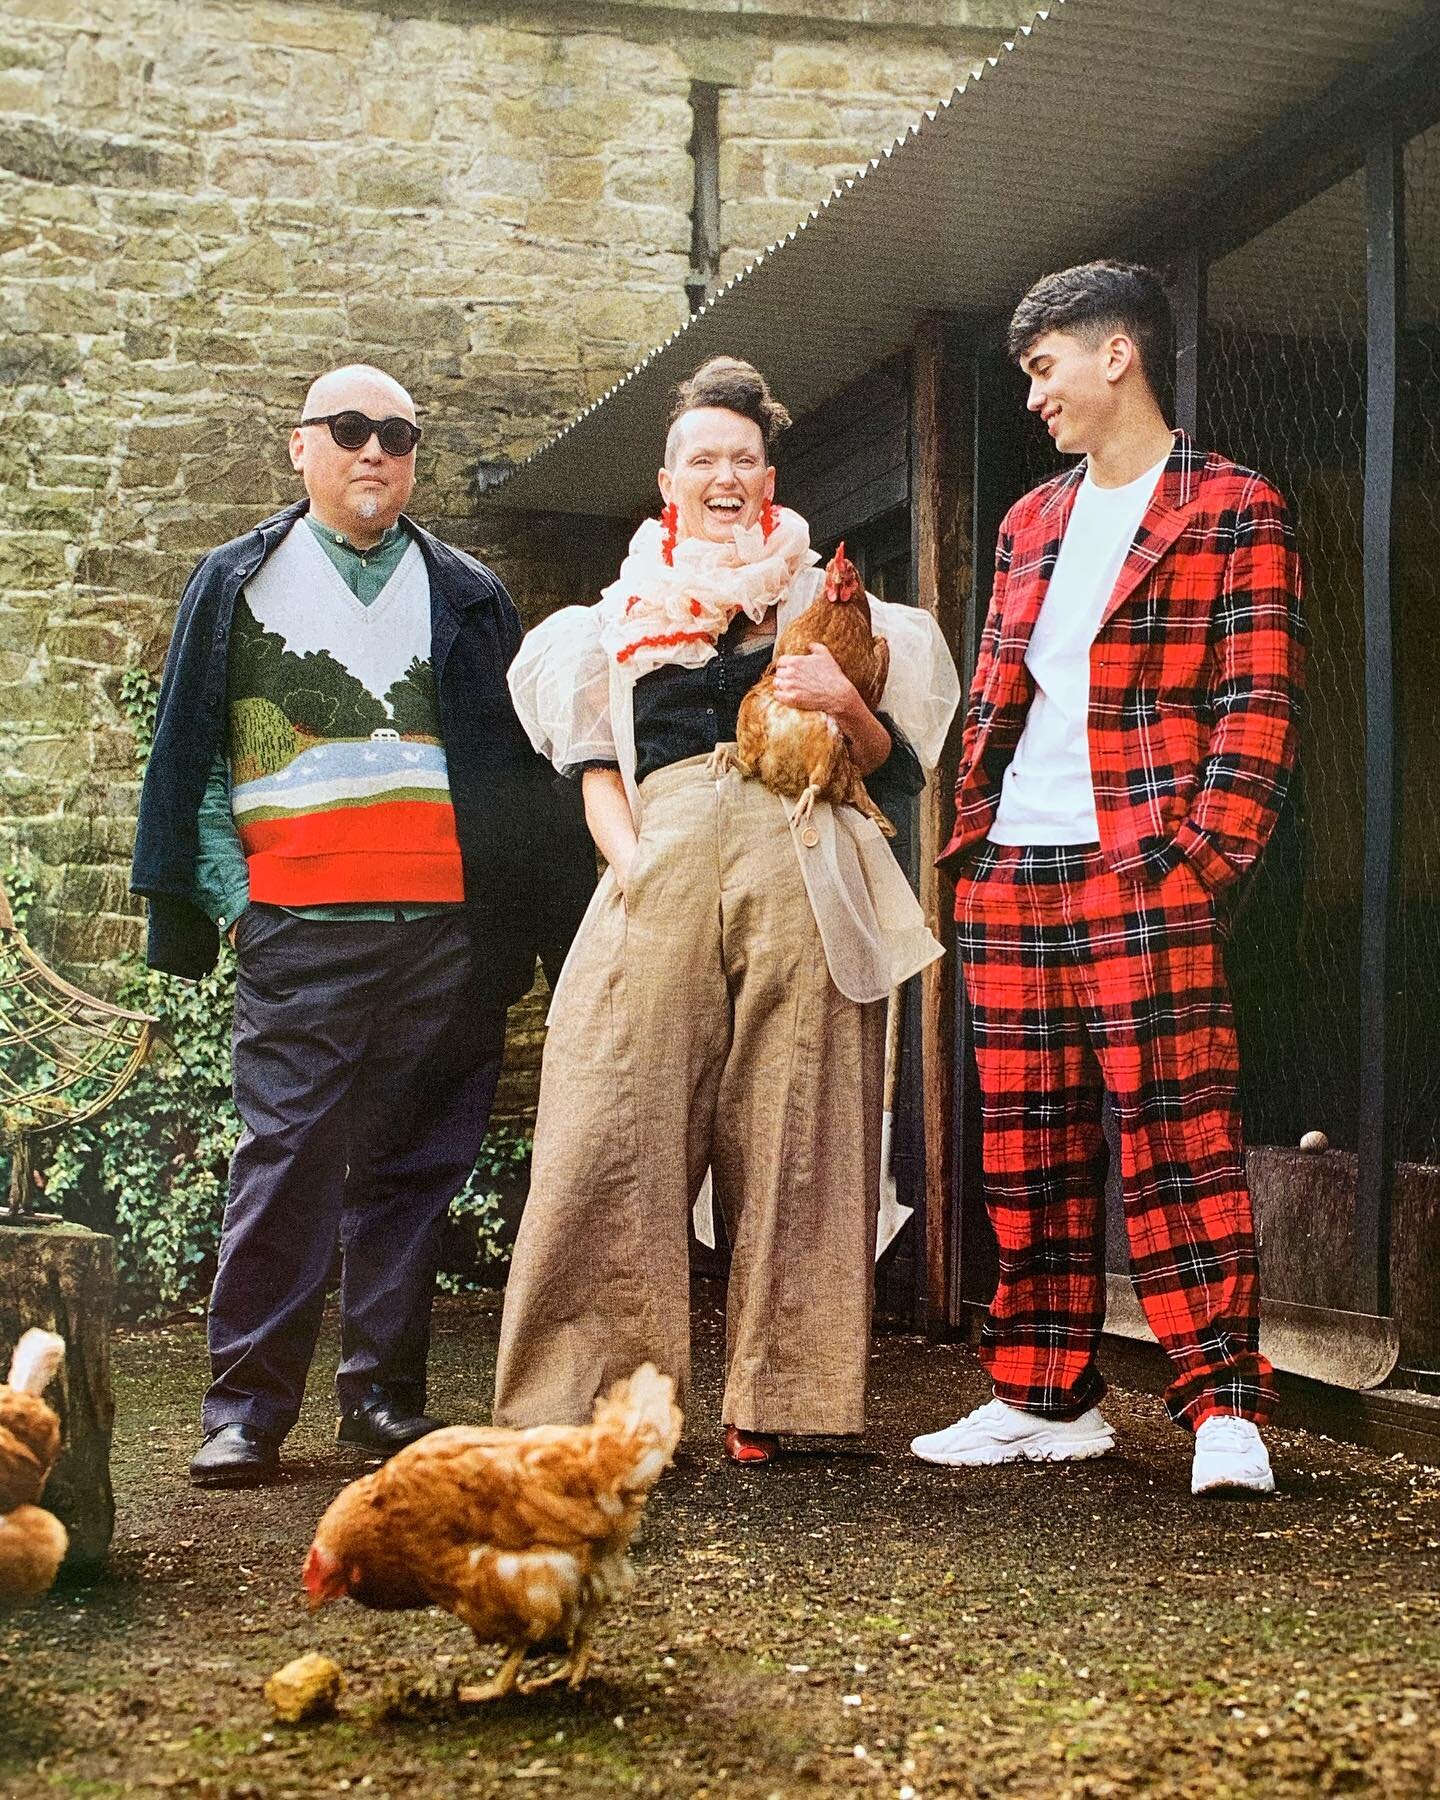 Love these shots of @glasgow_diaz and her wonderful family in @irishtatler @businessposthq today! 🐓
Captured by an amazing team @dkilfeather and @aisfarinella ✨
.
Jeni wears the Smocked Tweed trouser and Reuven wears the Stephens Green jumper 🦢
.
.